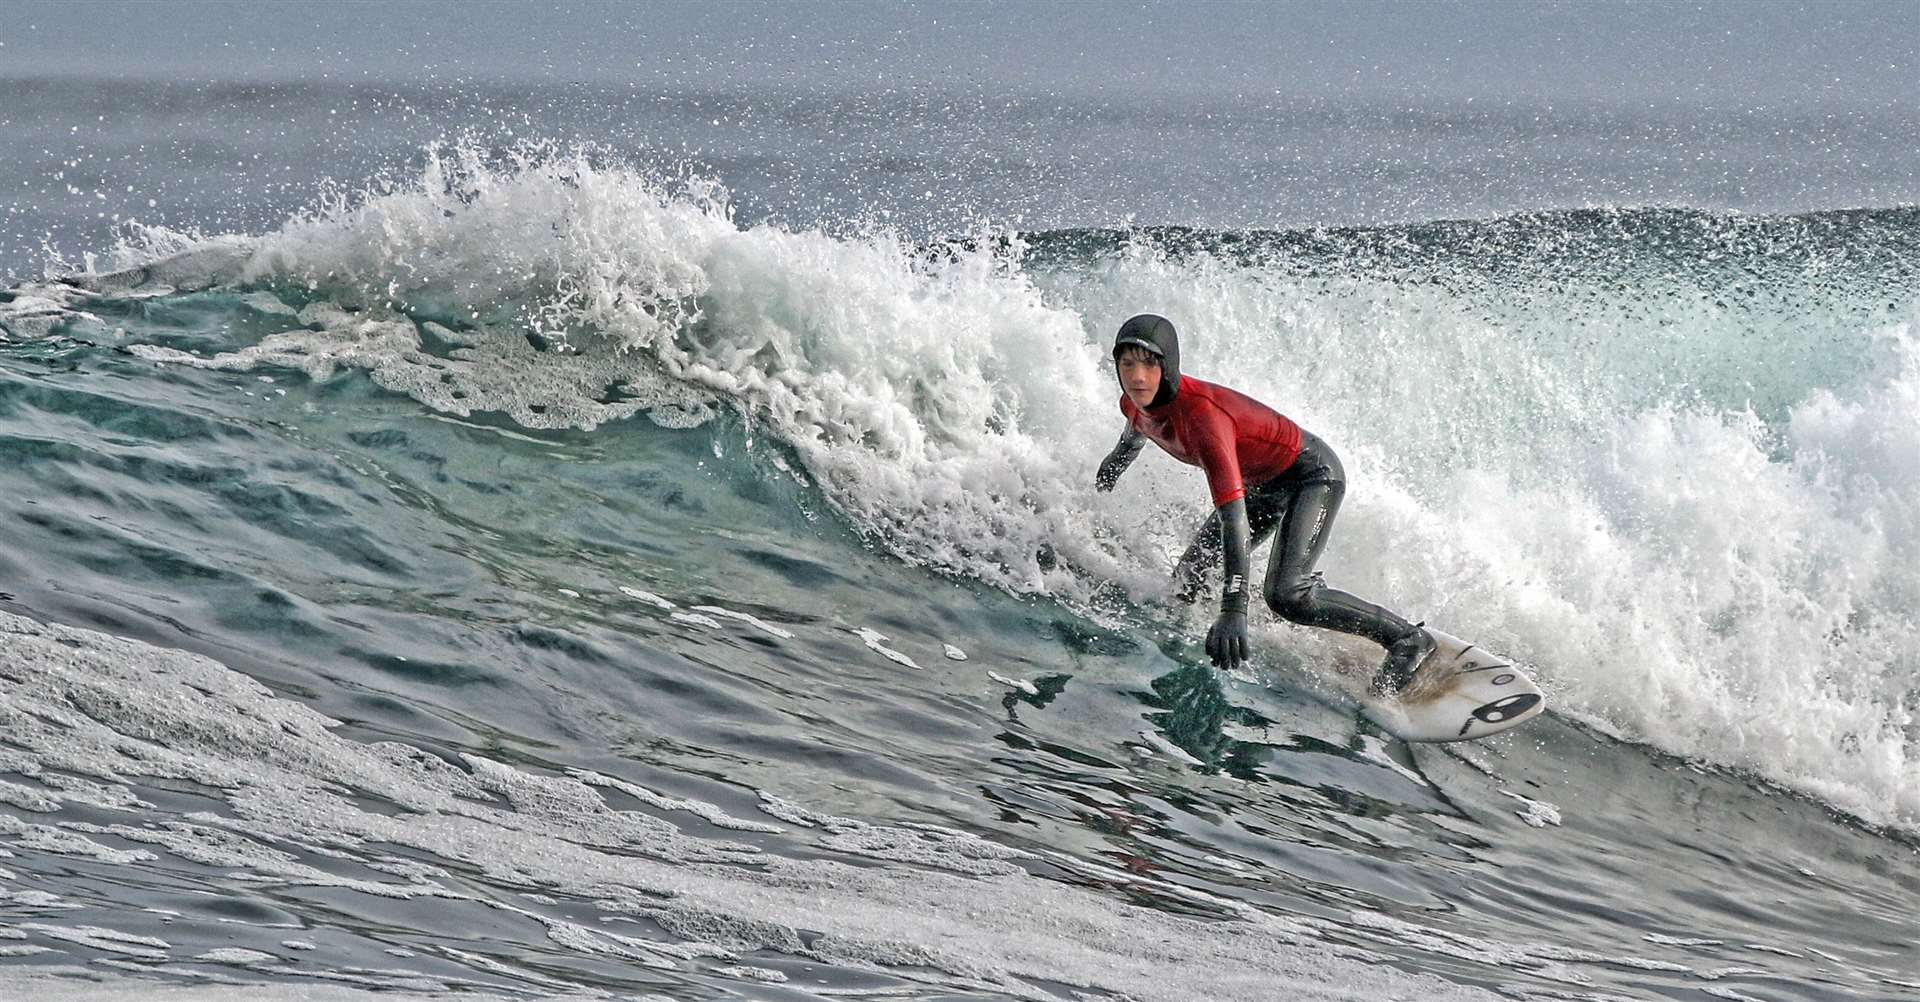 Craig Mclachlan competes in the Scottish National Surfing Championships in Thurso.  Photo: James Gunn